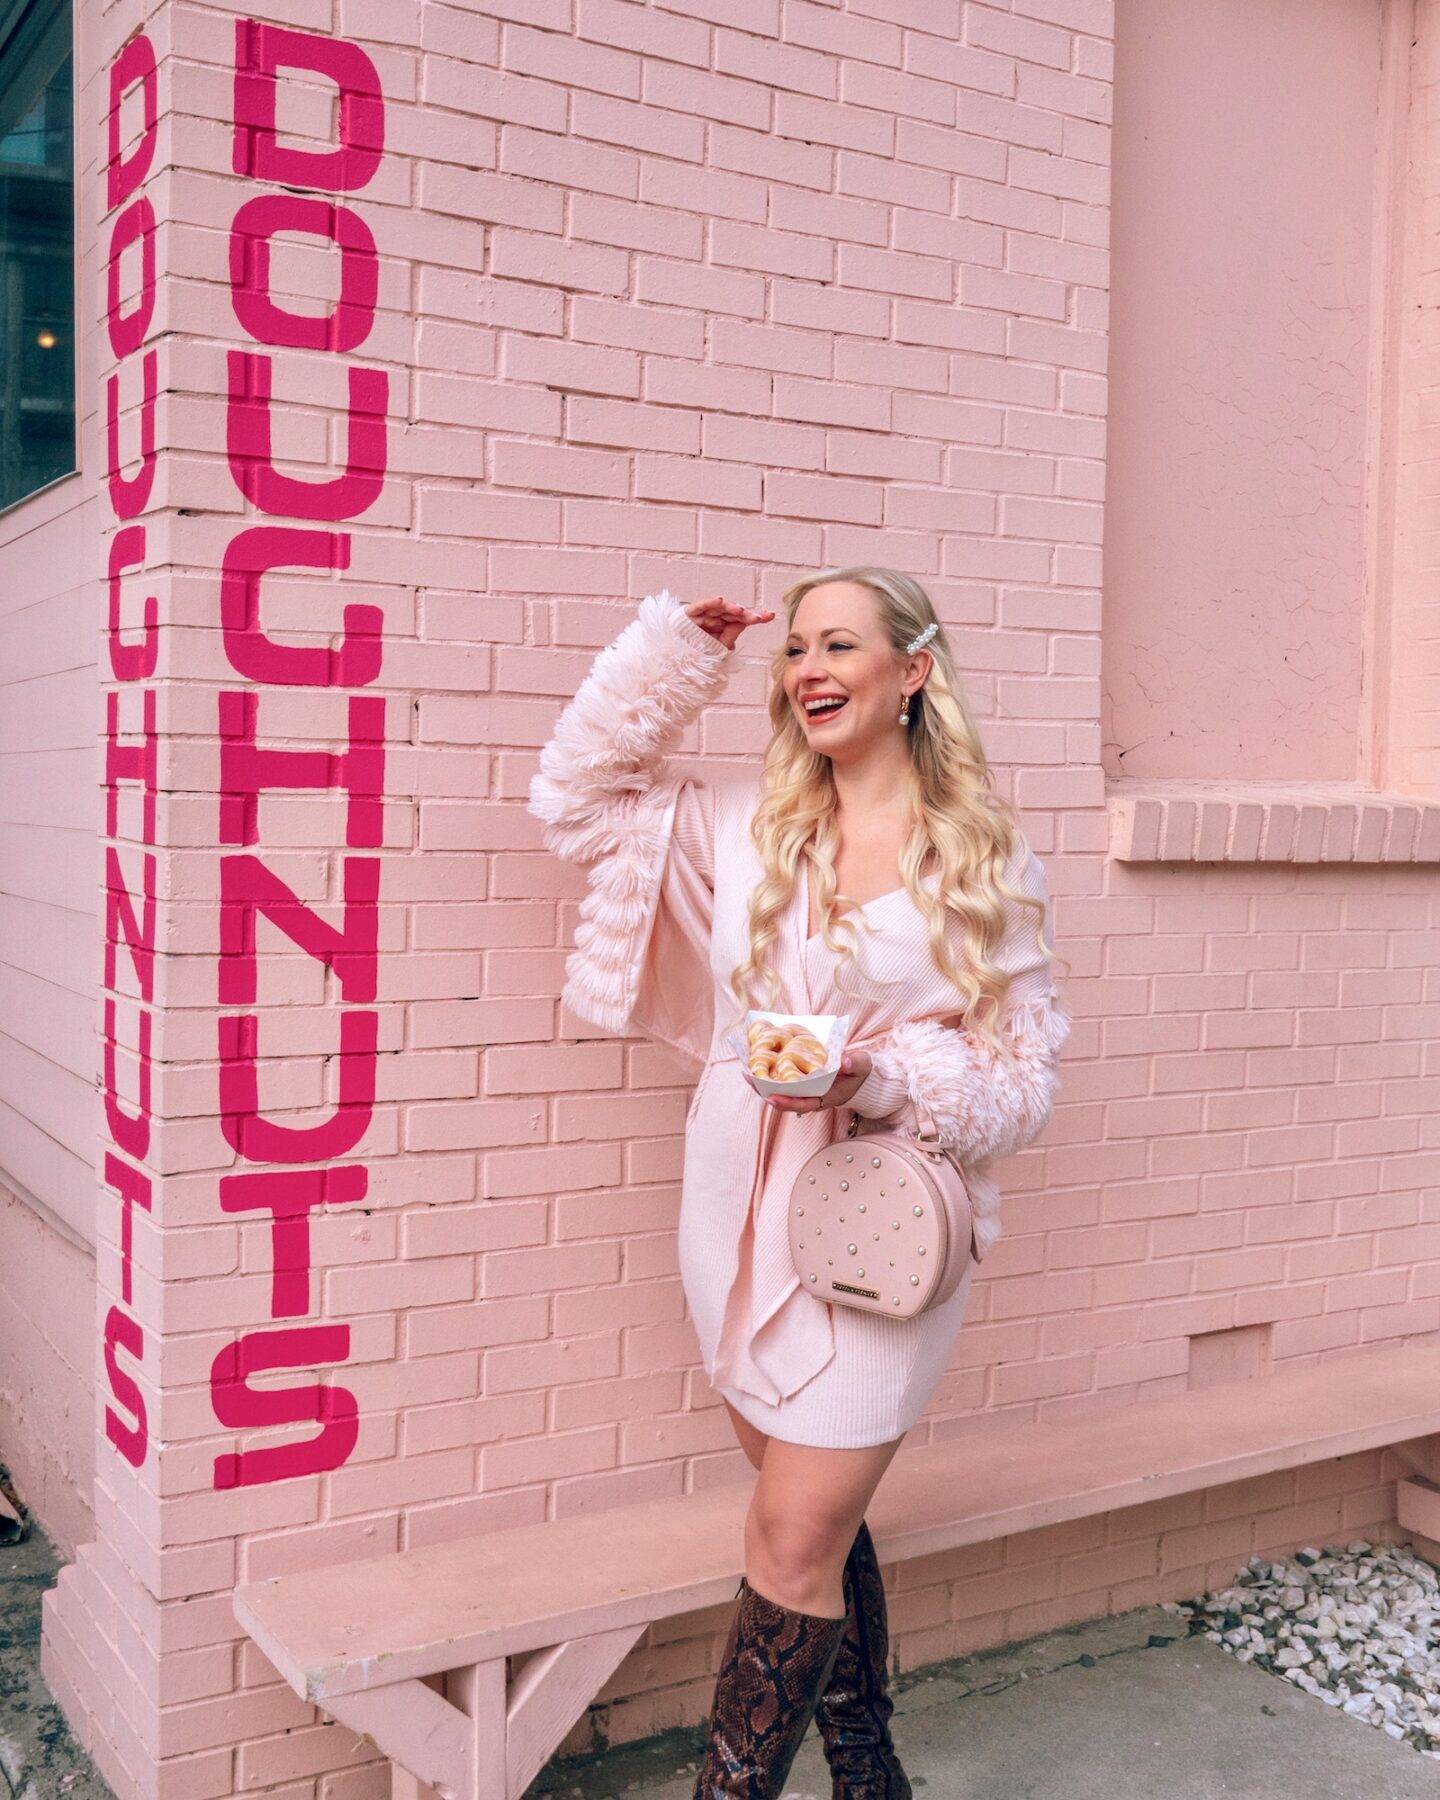 On the hunt for the best and most instagram-worthy pink places in Toronto? Look no further. As a native to Toronto and a certified pink lover myself I've put together this list of all the places you won't want to miss. This post has all the hottest pink spots in Toronto from restaurants, to pink walls, ice cream parlours and more. If you're a lover of pink you won't want to miss checking out this list of pink Toronto spots. Pictured here: COPS Toronto